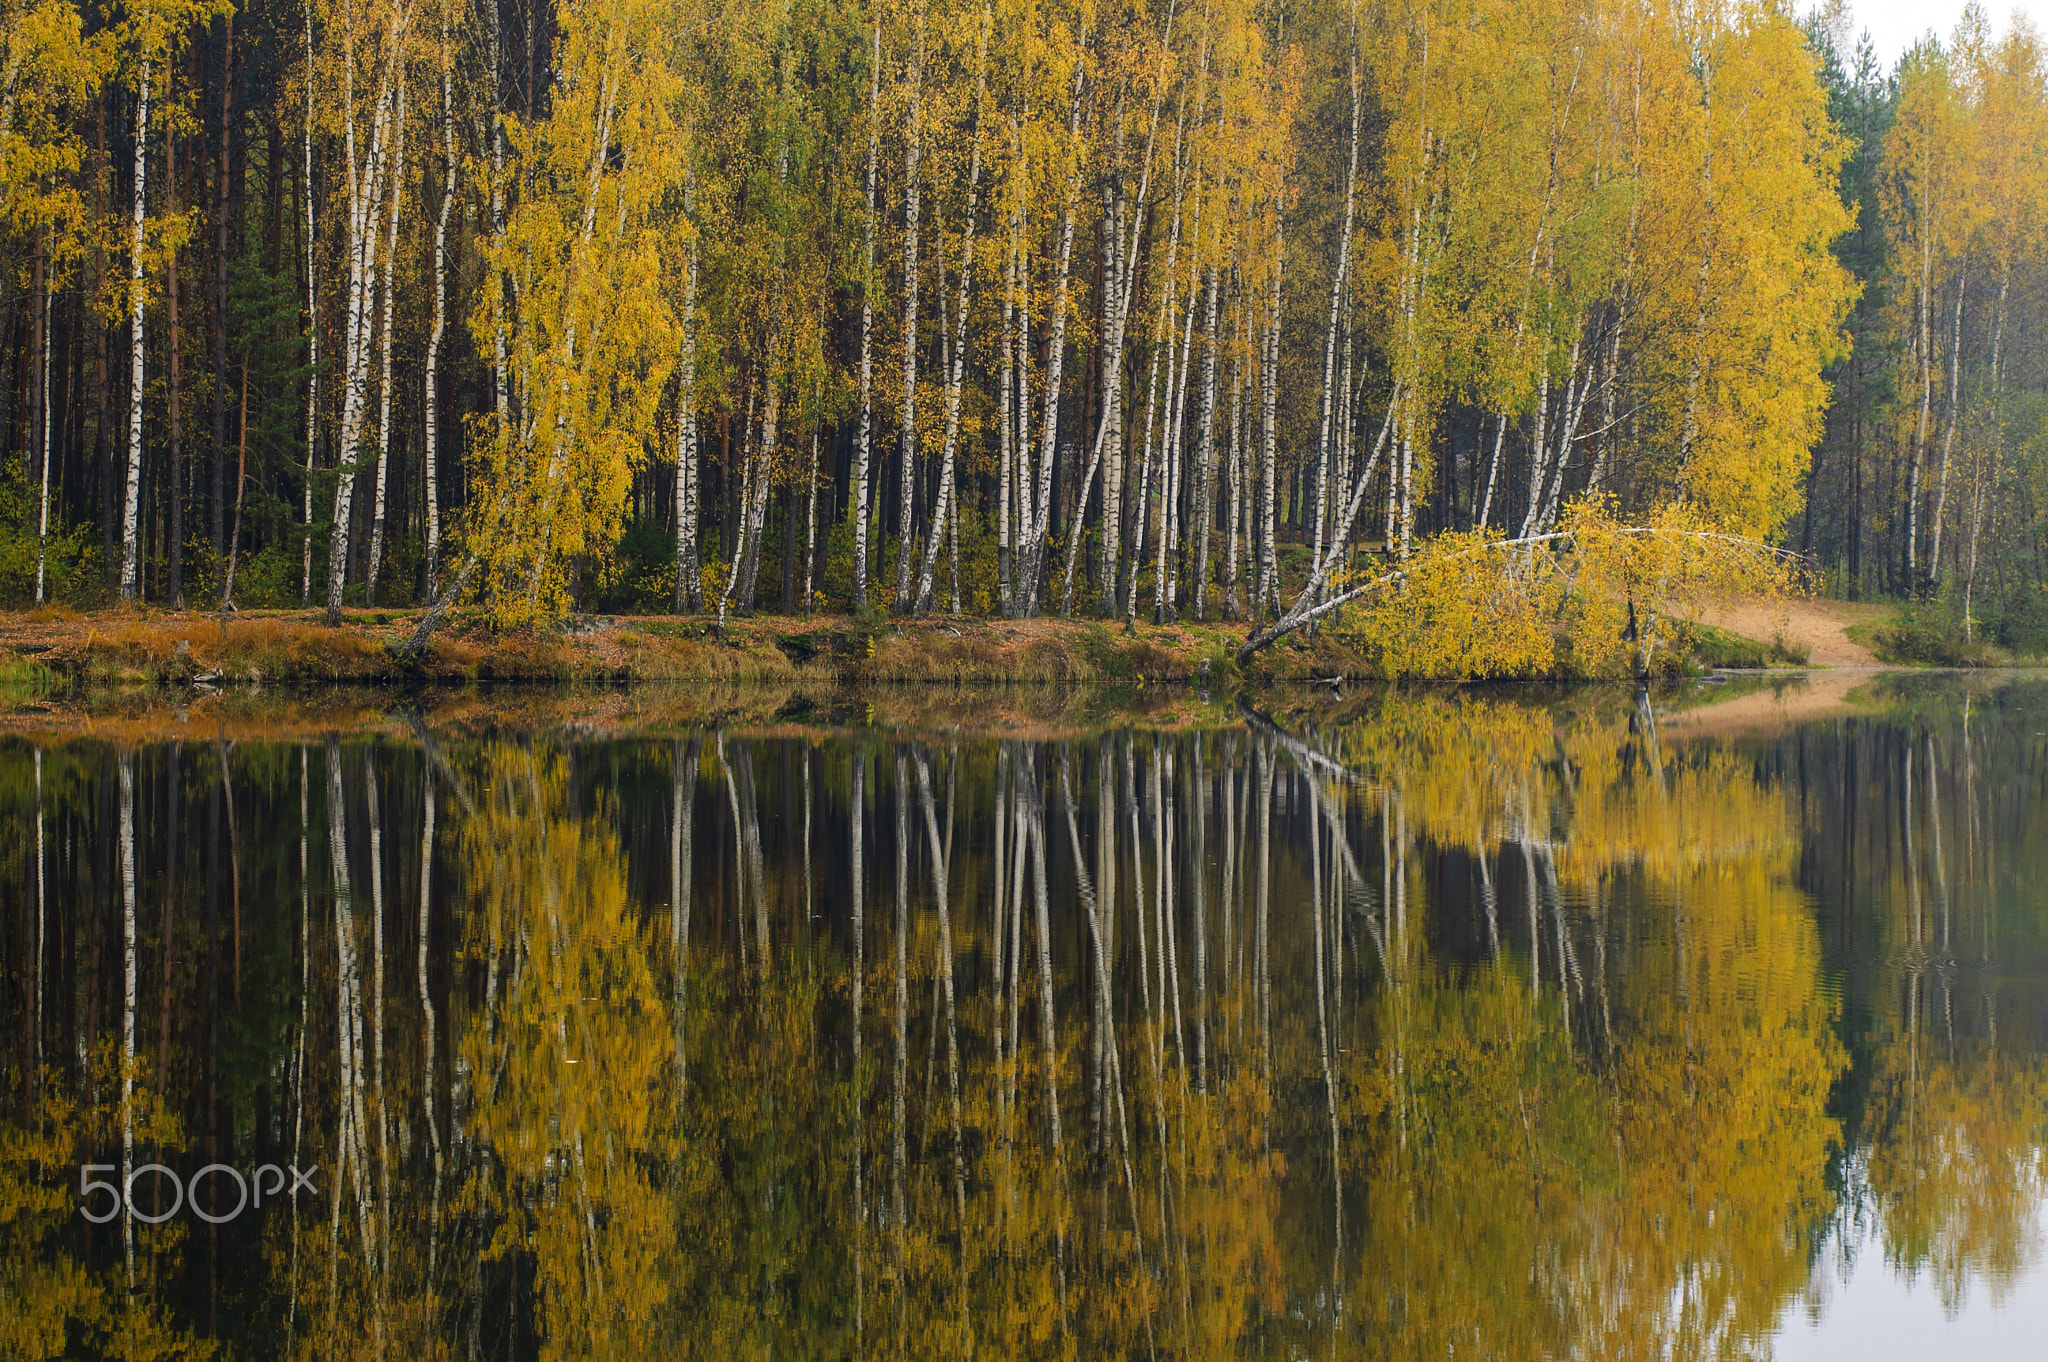 Autumn forest and its reflection.